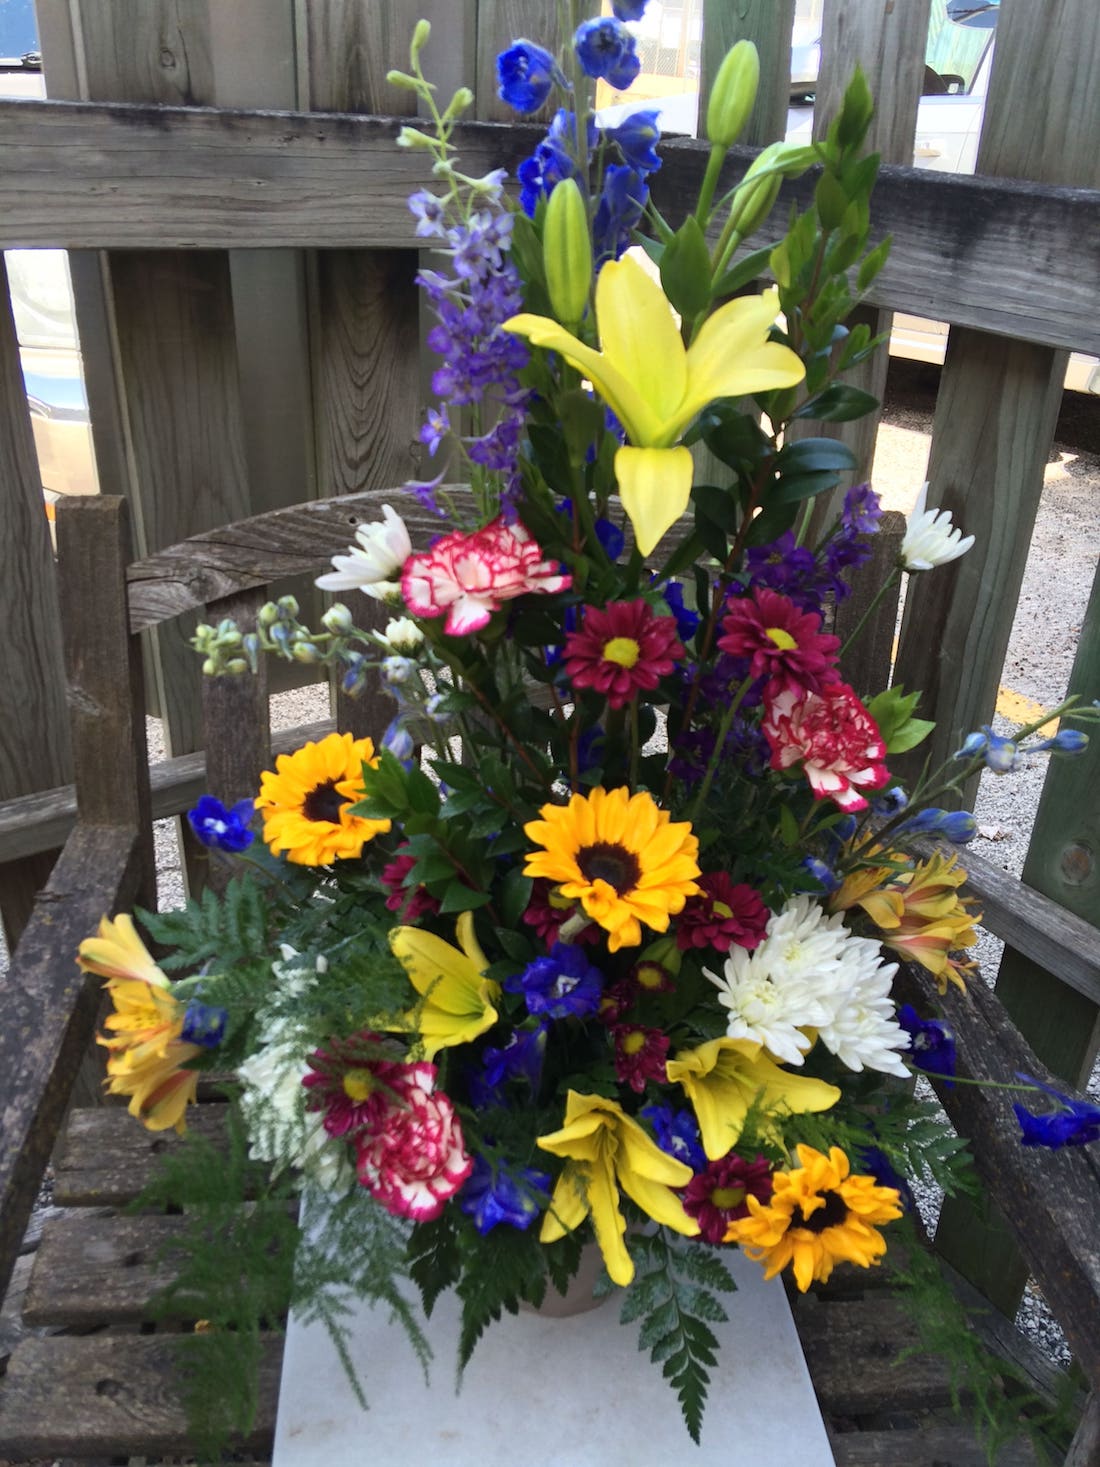 Sunflowers Lilies Carnations Poms Delphinium In an Urn